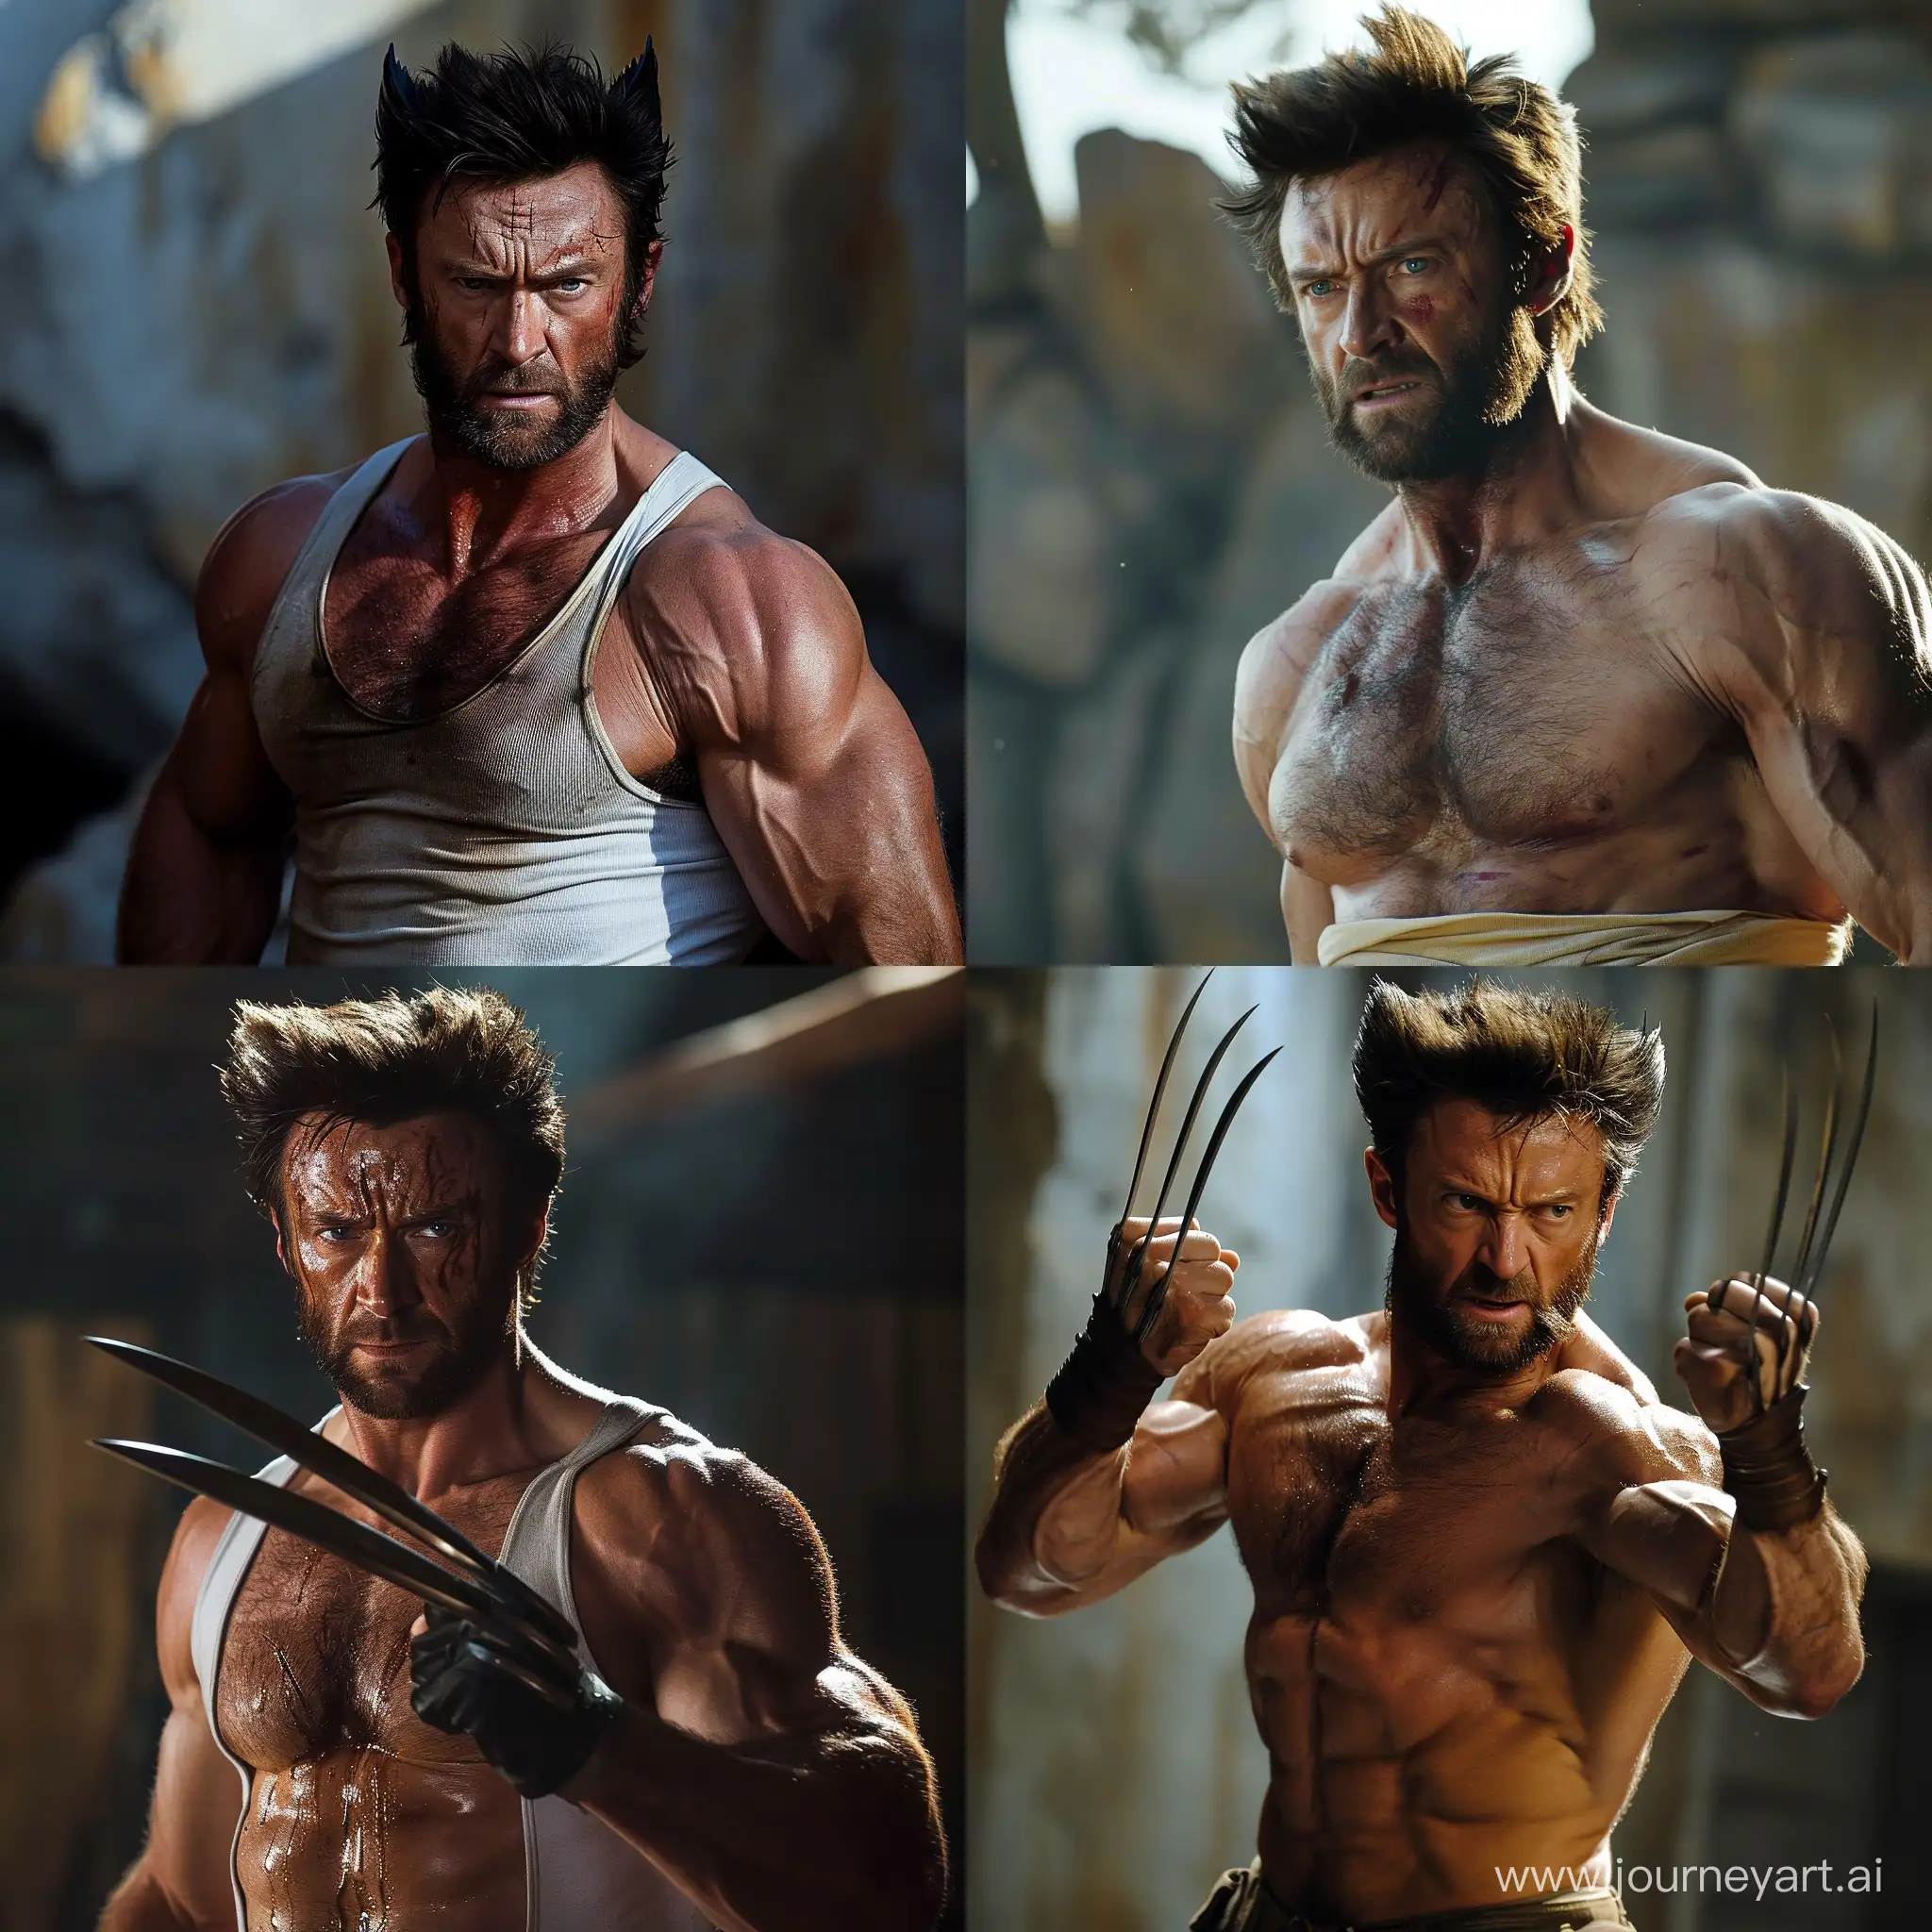 Hugh-Jackman-Portraying-Wolverine-in-Dynamic-Action-Artwork-with-Aspect-Ratio-11